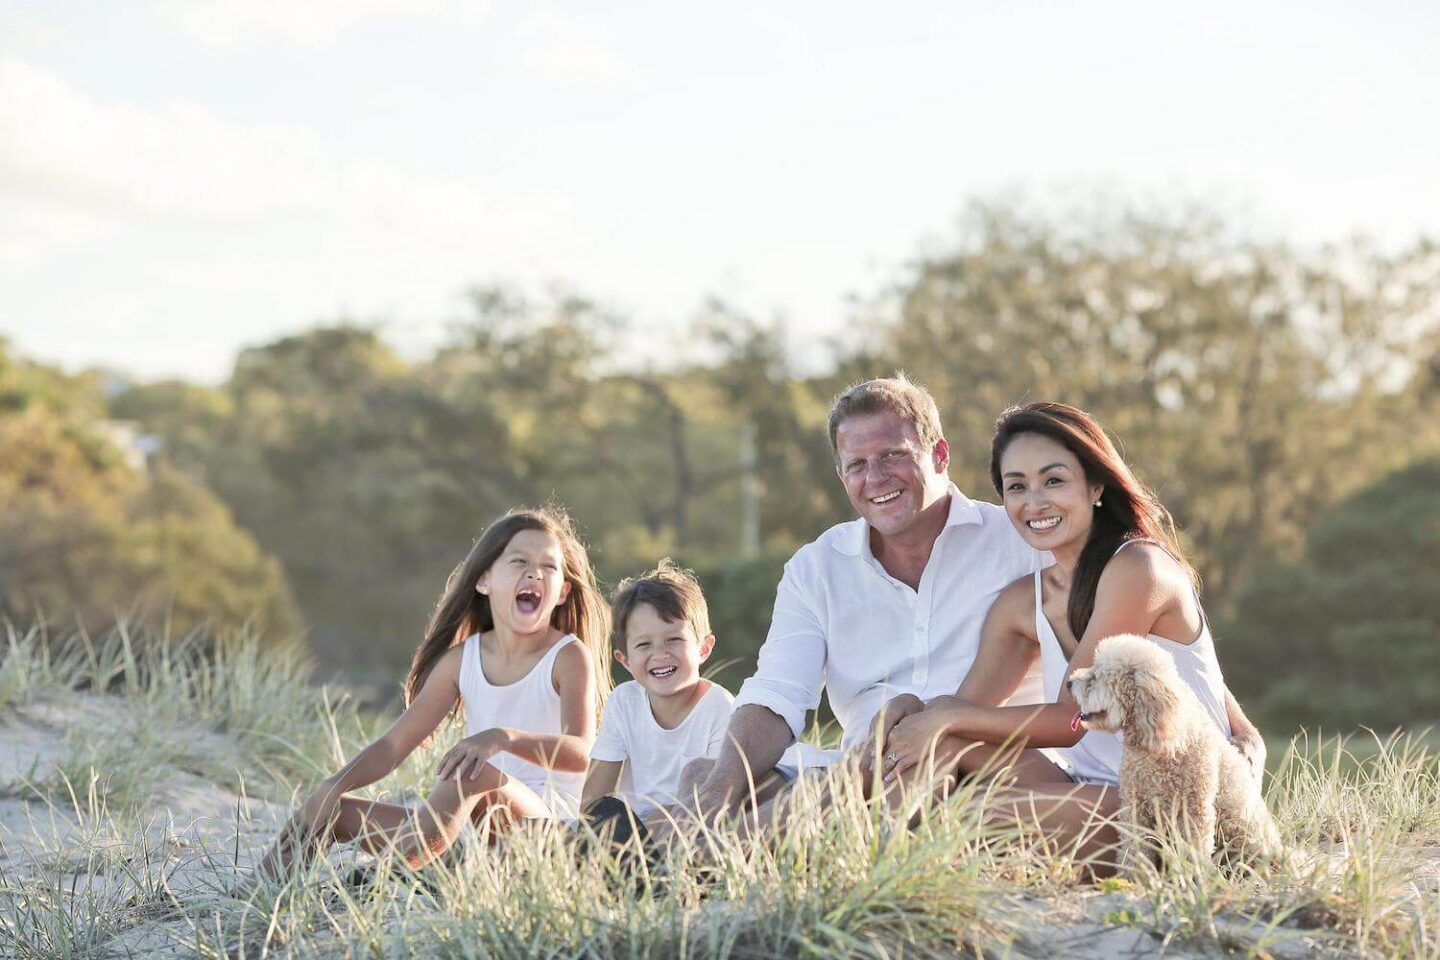 A family sit on some grass and sand with their dog. They are all dressed in white and smiling at the camera